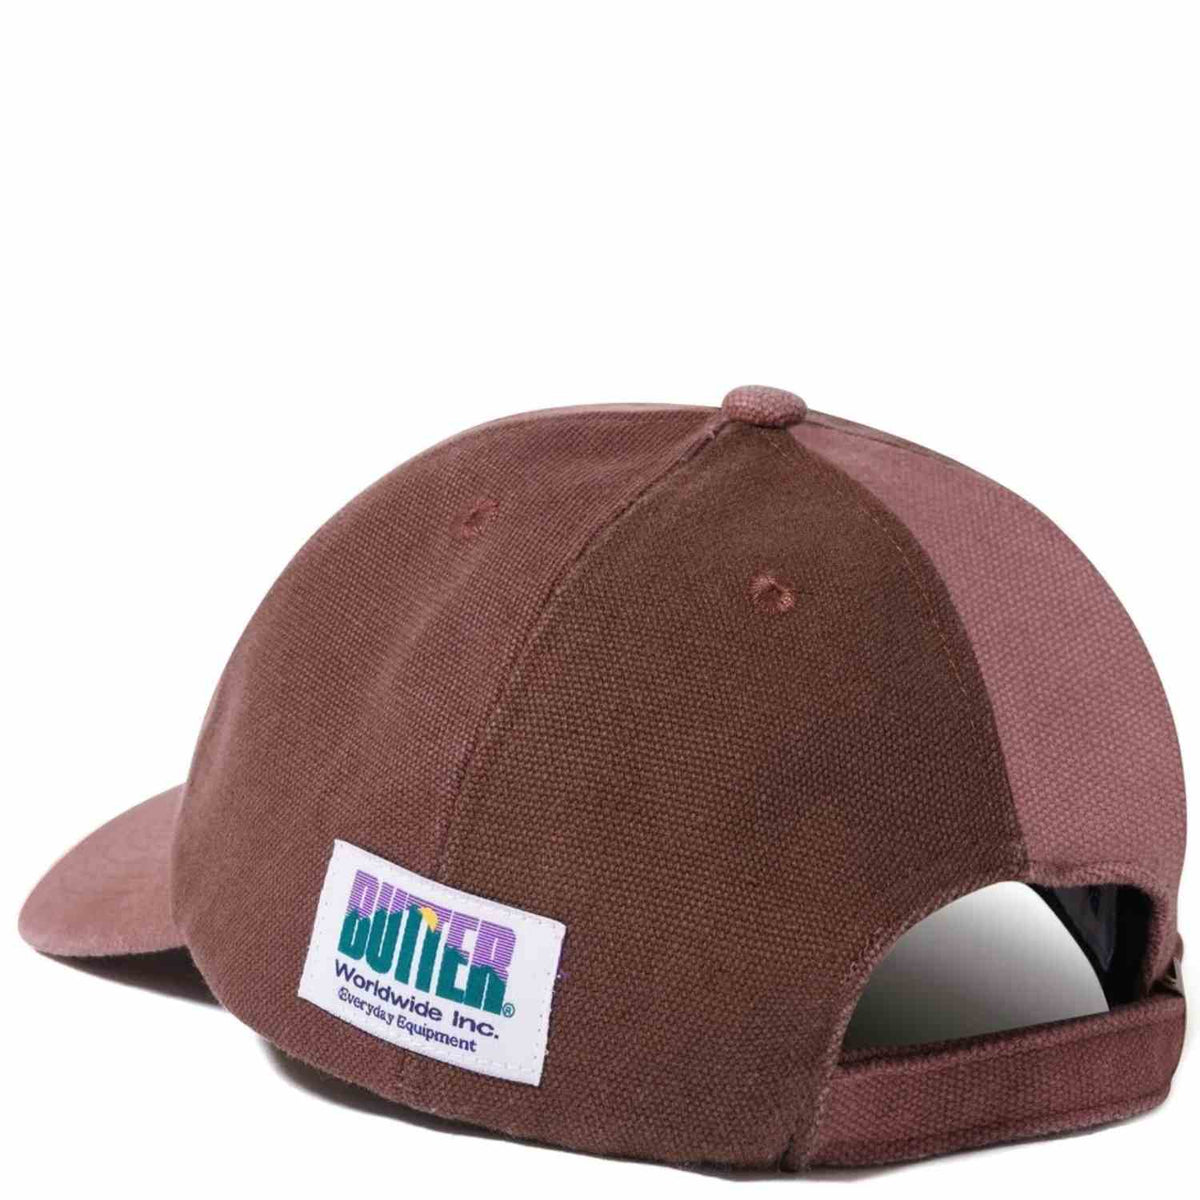 Butter Goods Canvas Patchwork 6 Panel Cap - Washed Burgundy